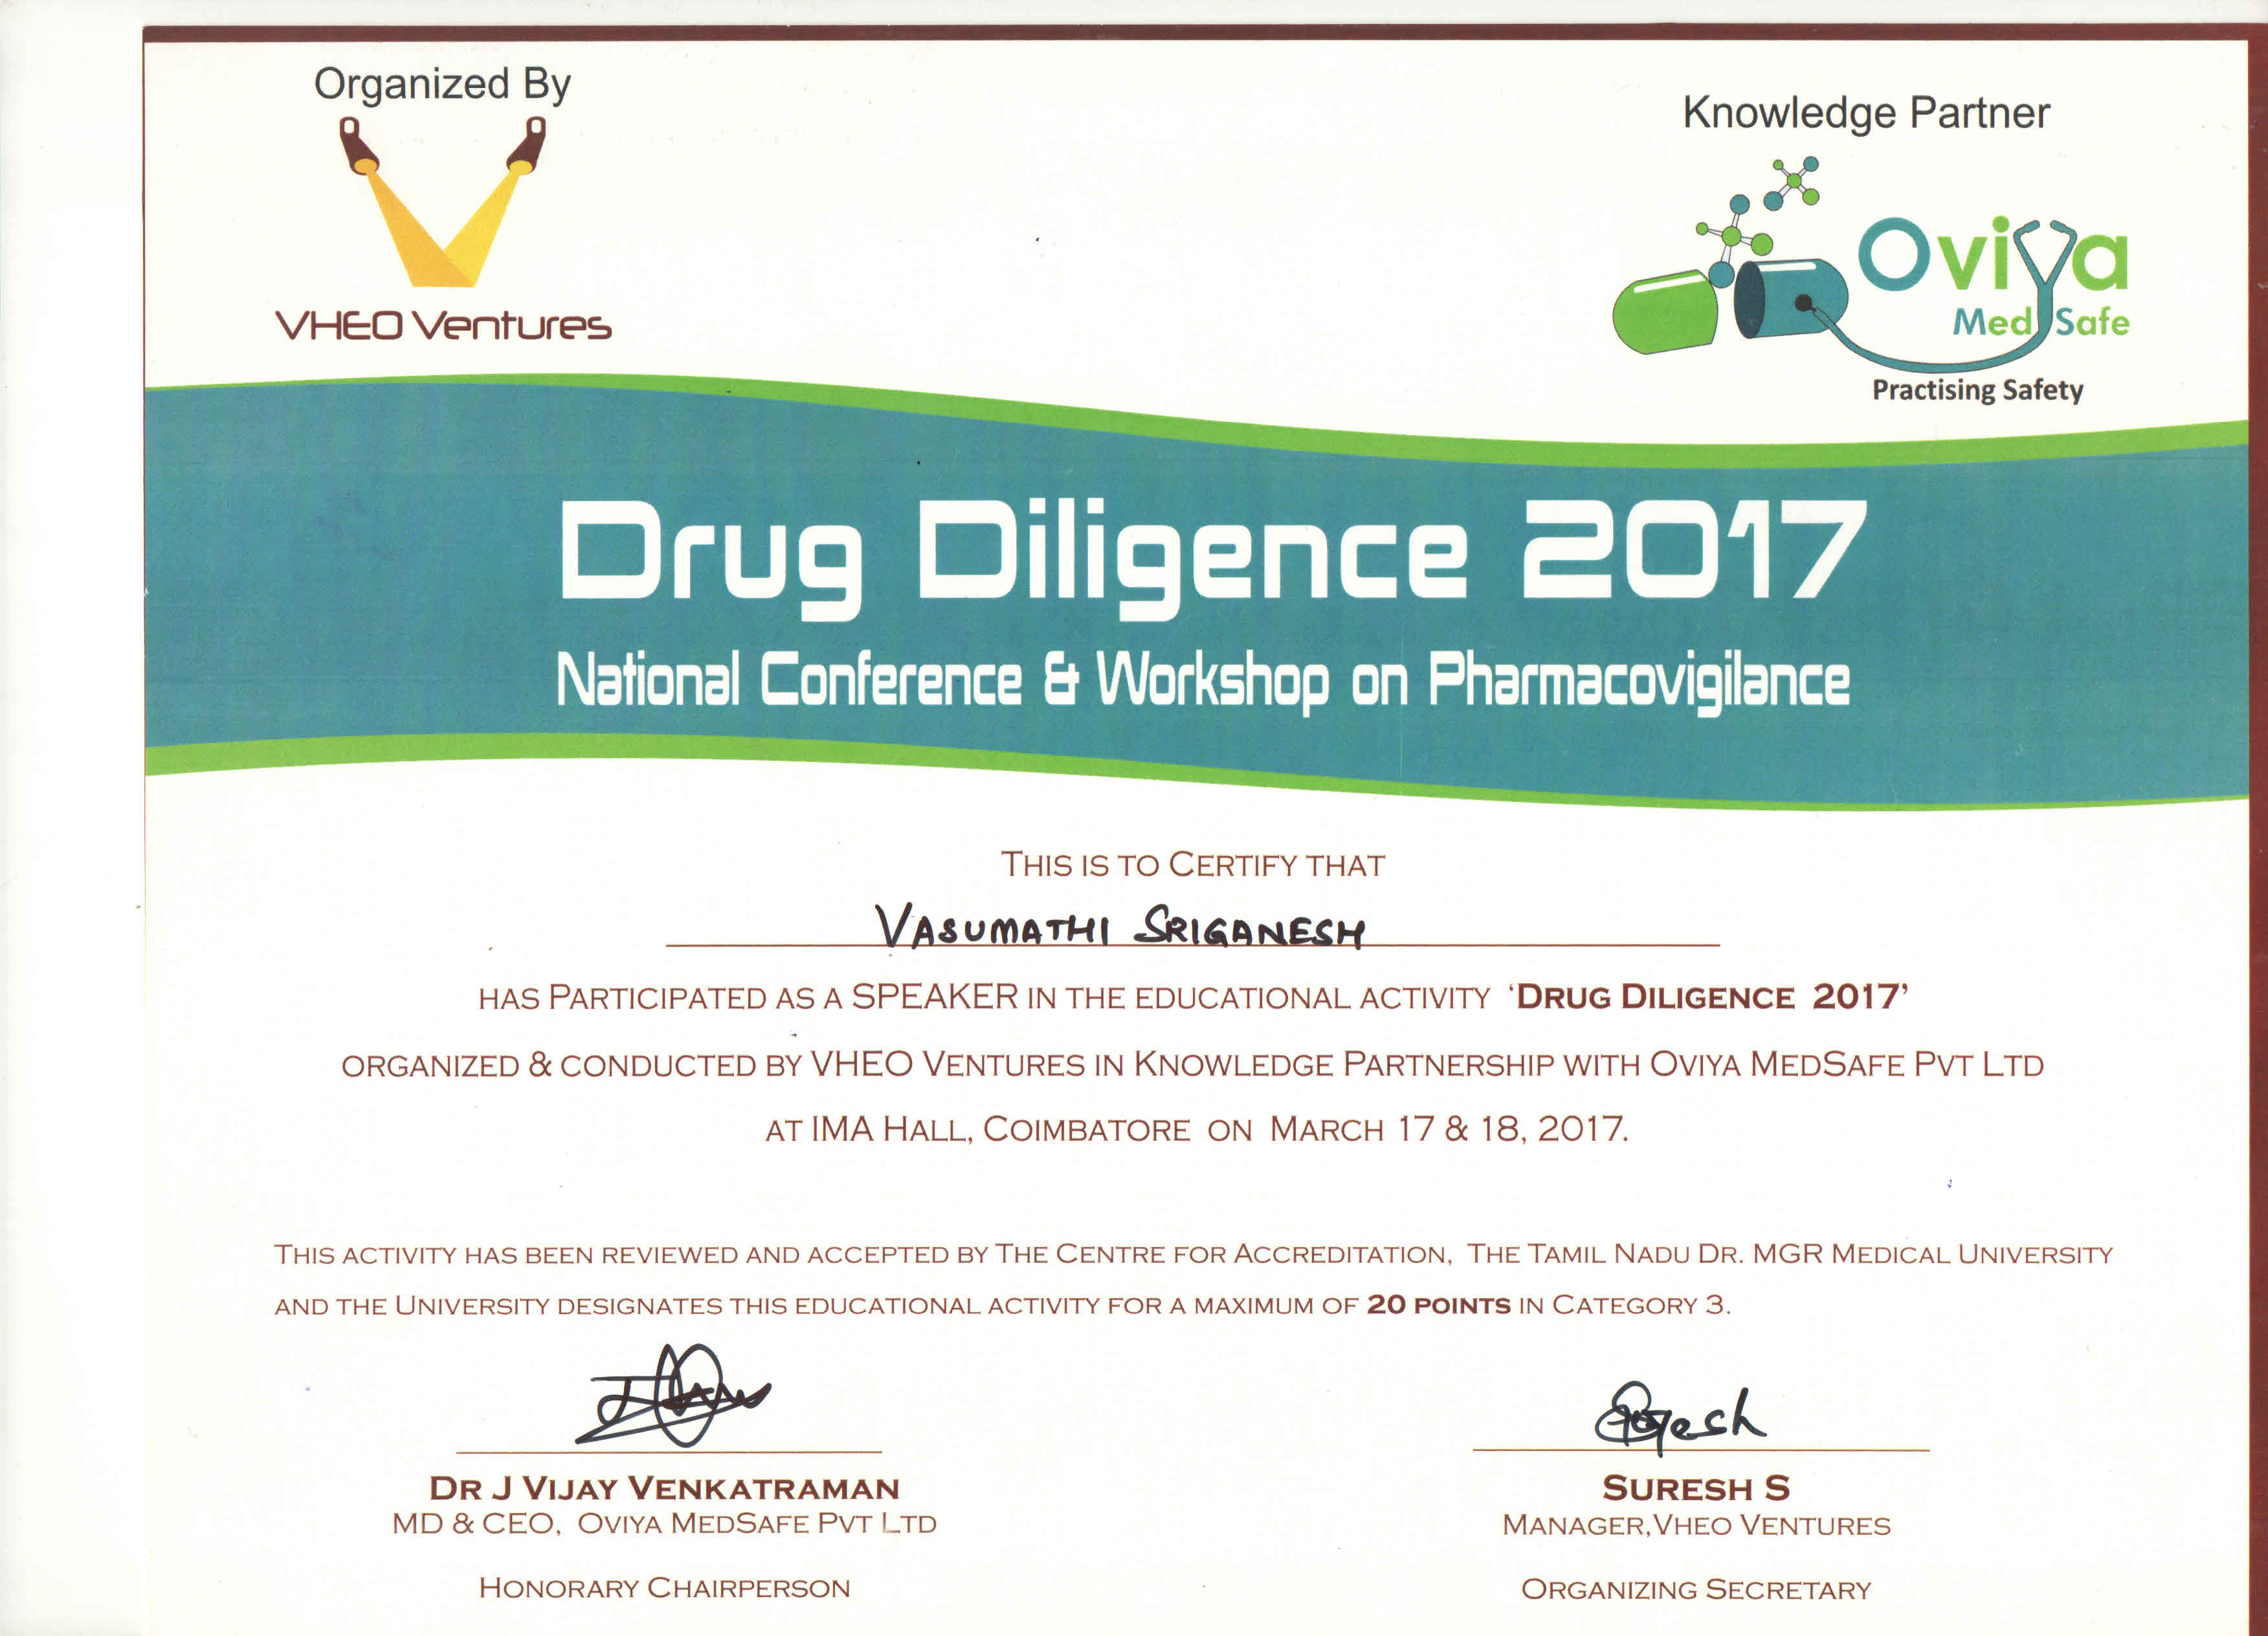 Indian Pharmacovigilance Day-Lecture